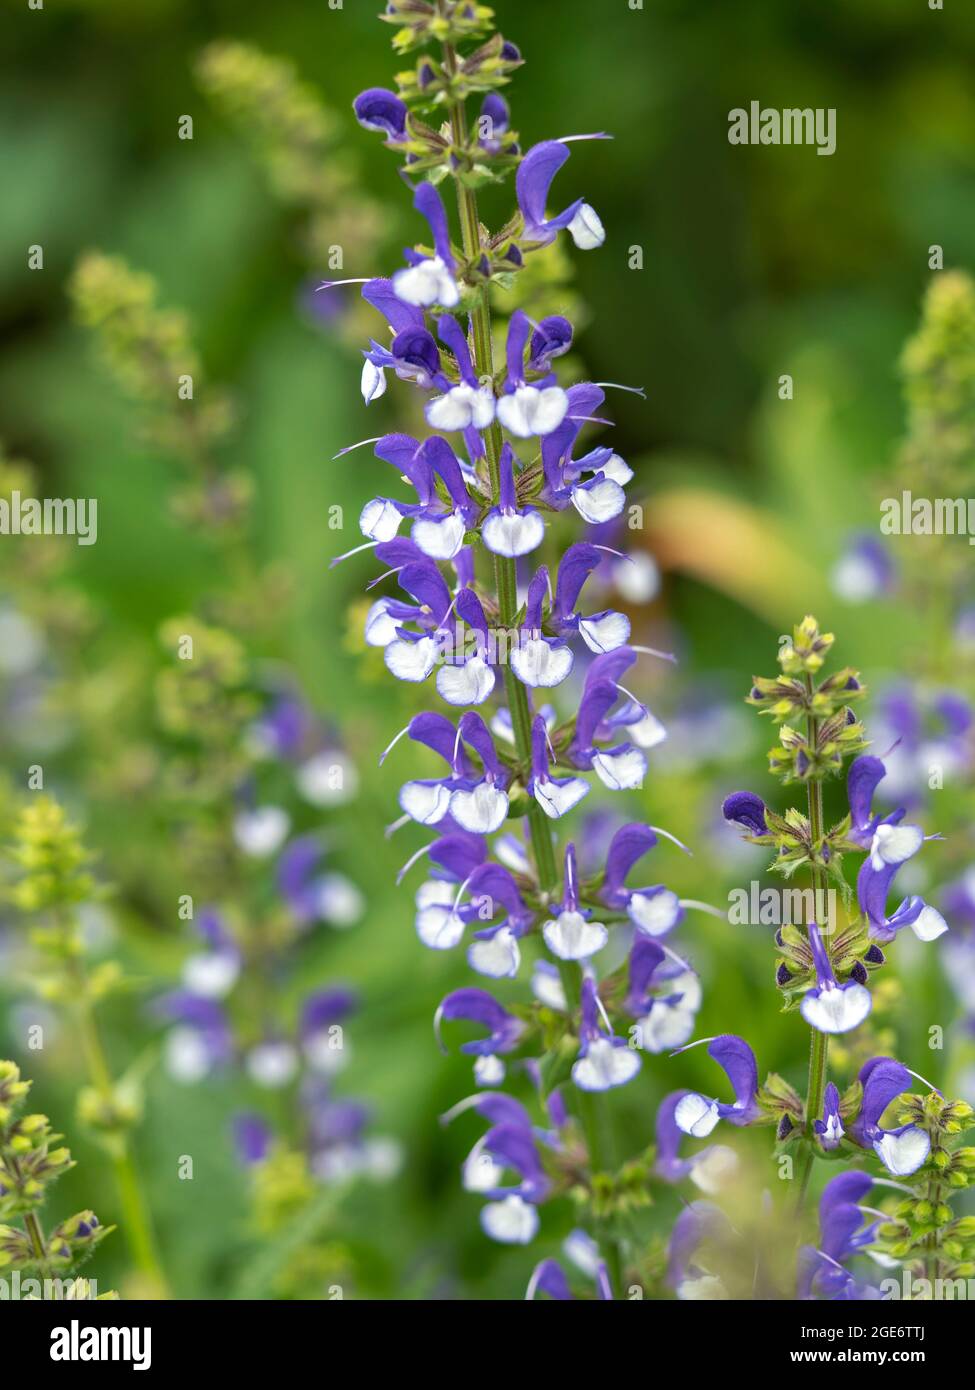 Blue and white flower spike of Salvia farinacea Stock Photo